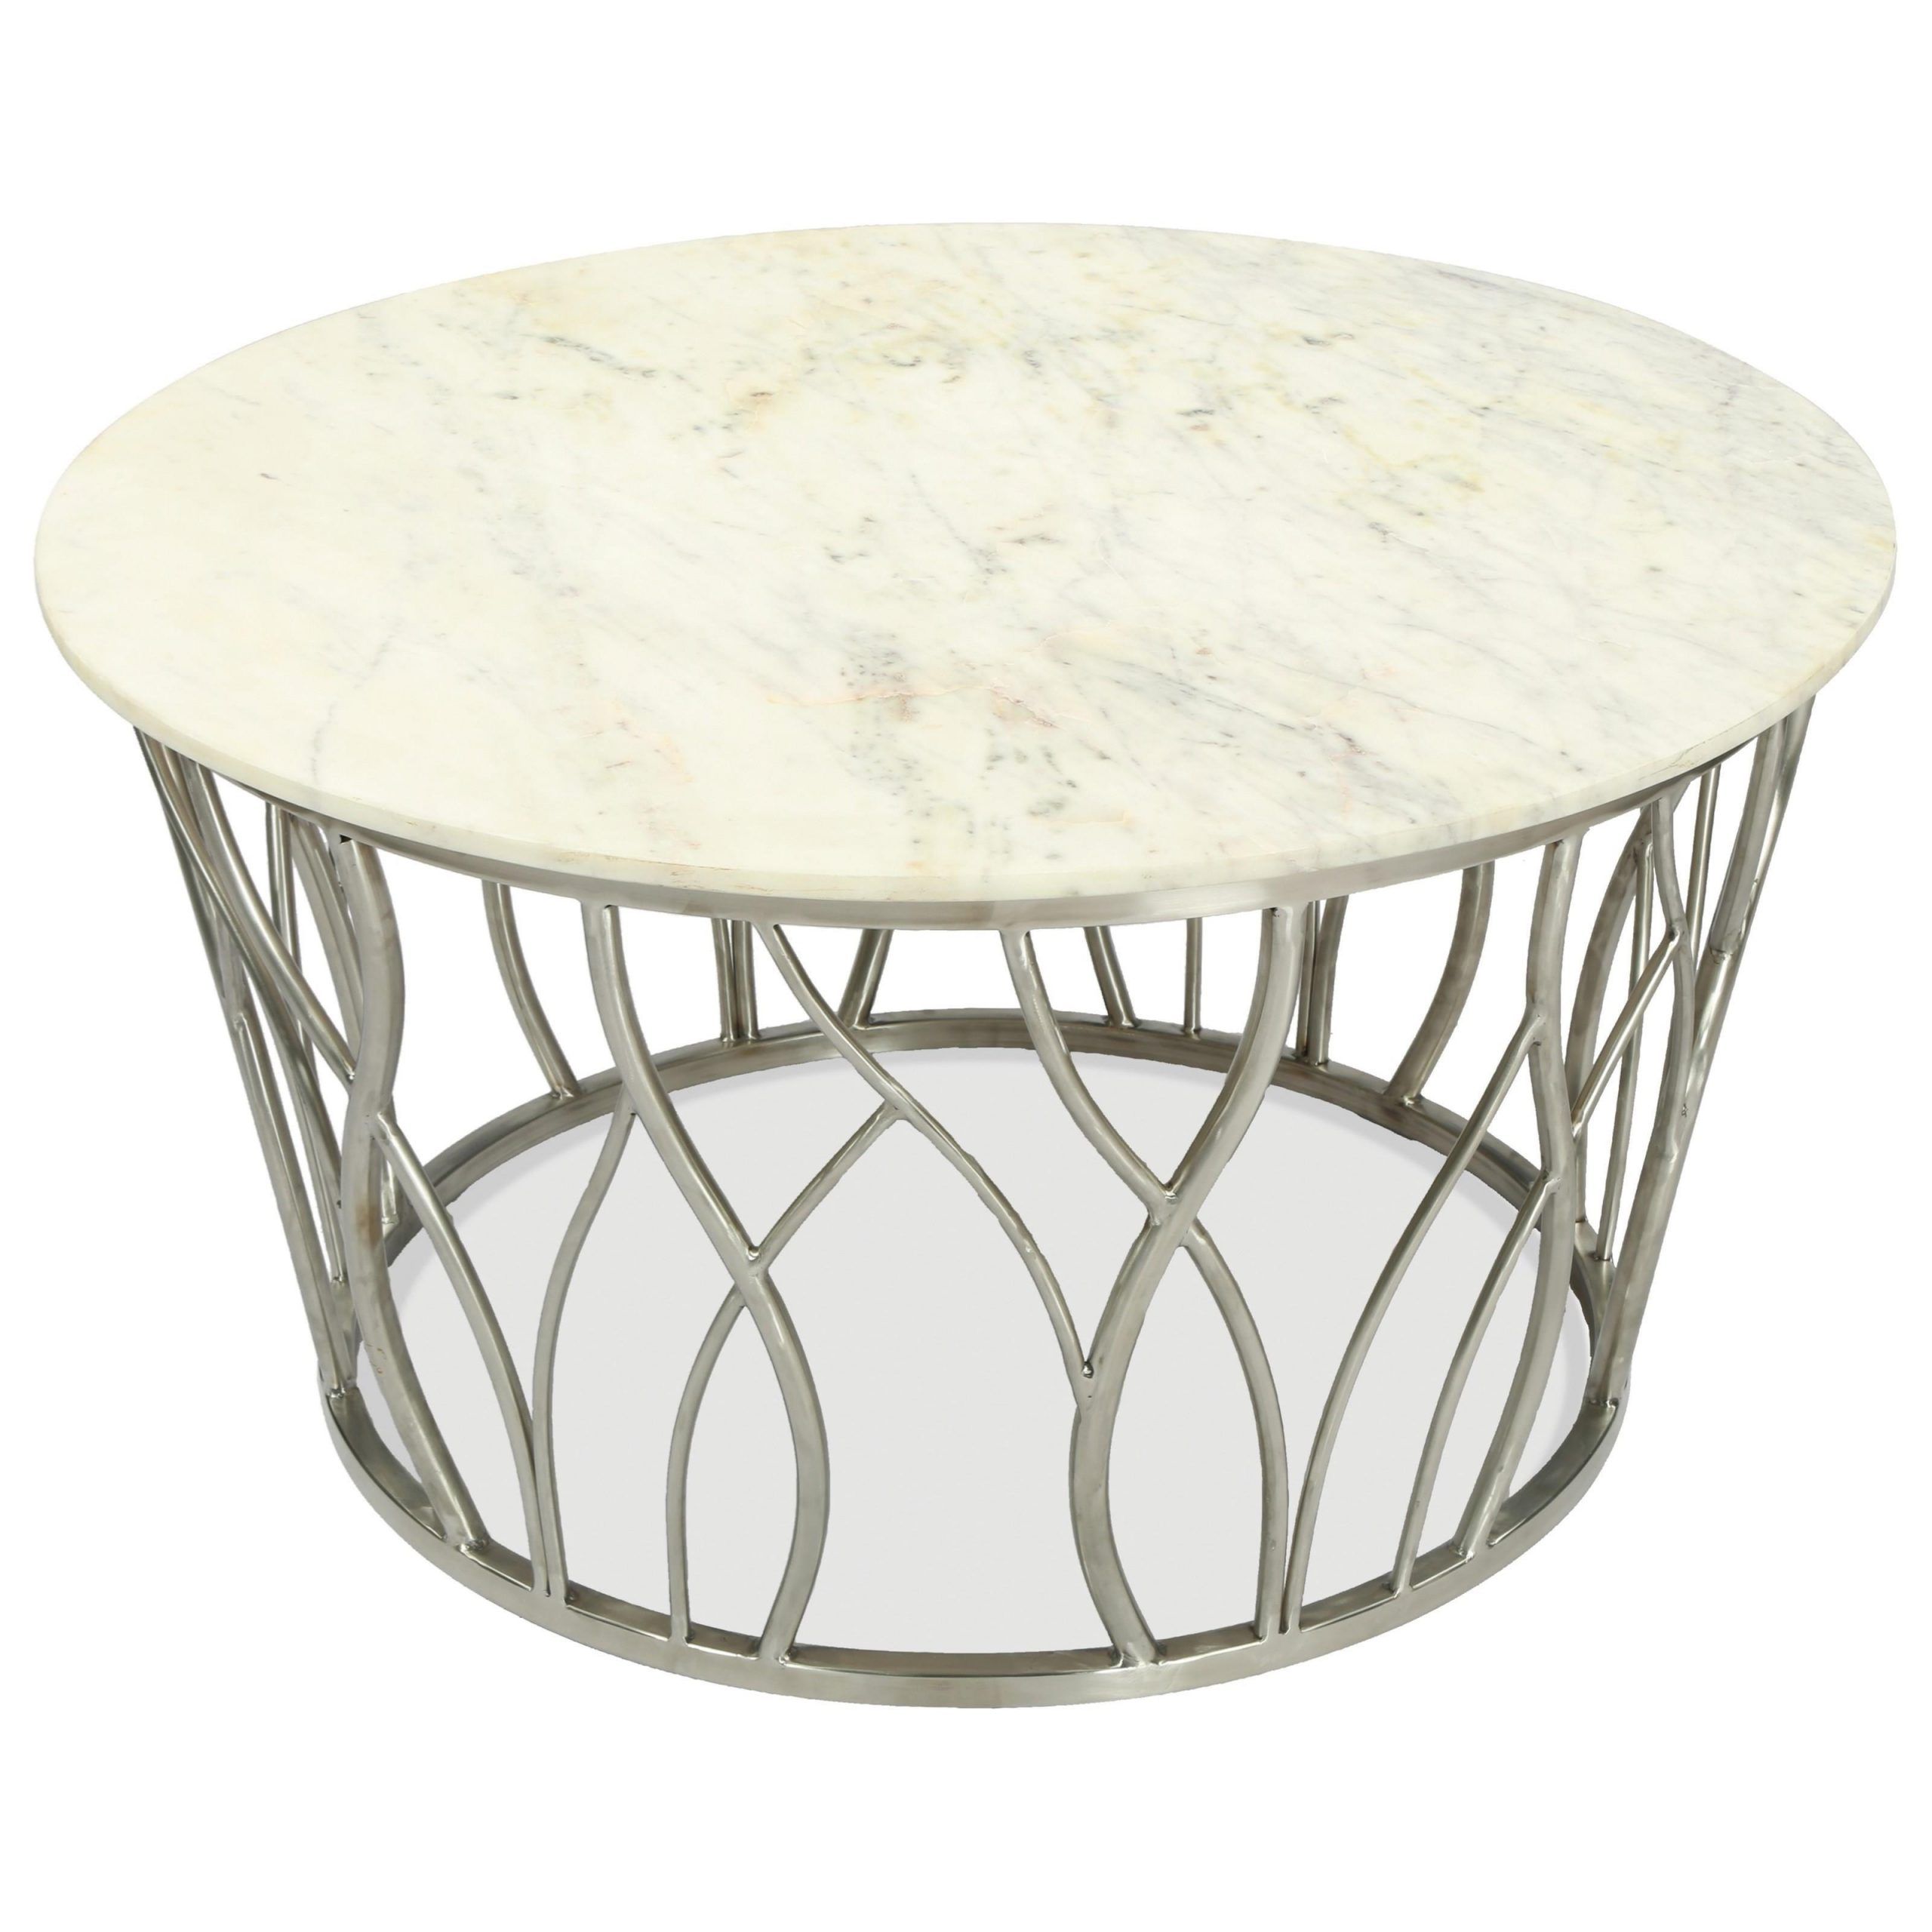 Riverside Furniture Ulysses 53702 Transitional Round Throughout Preferred Marble Top Coffee Tables (View 12 of 20)